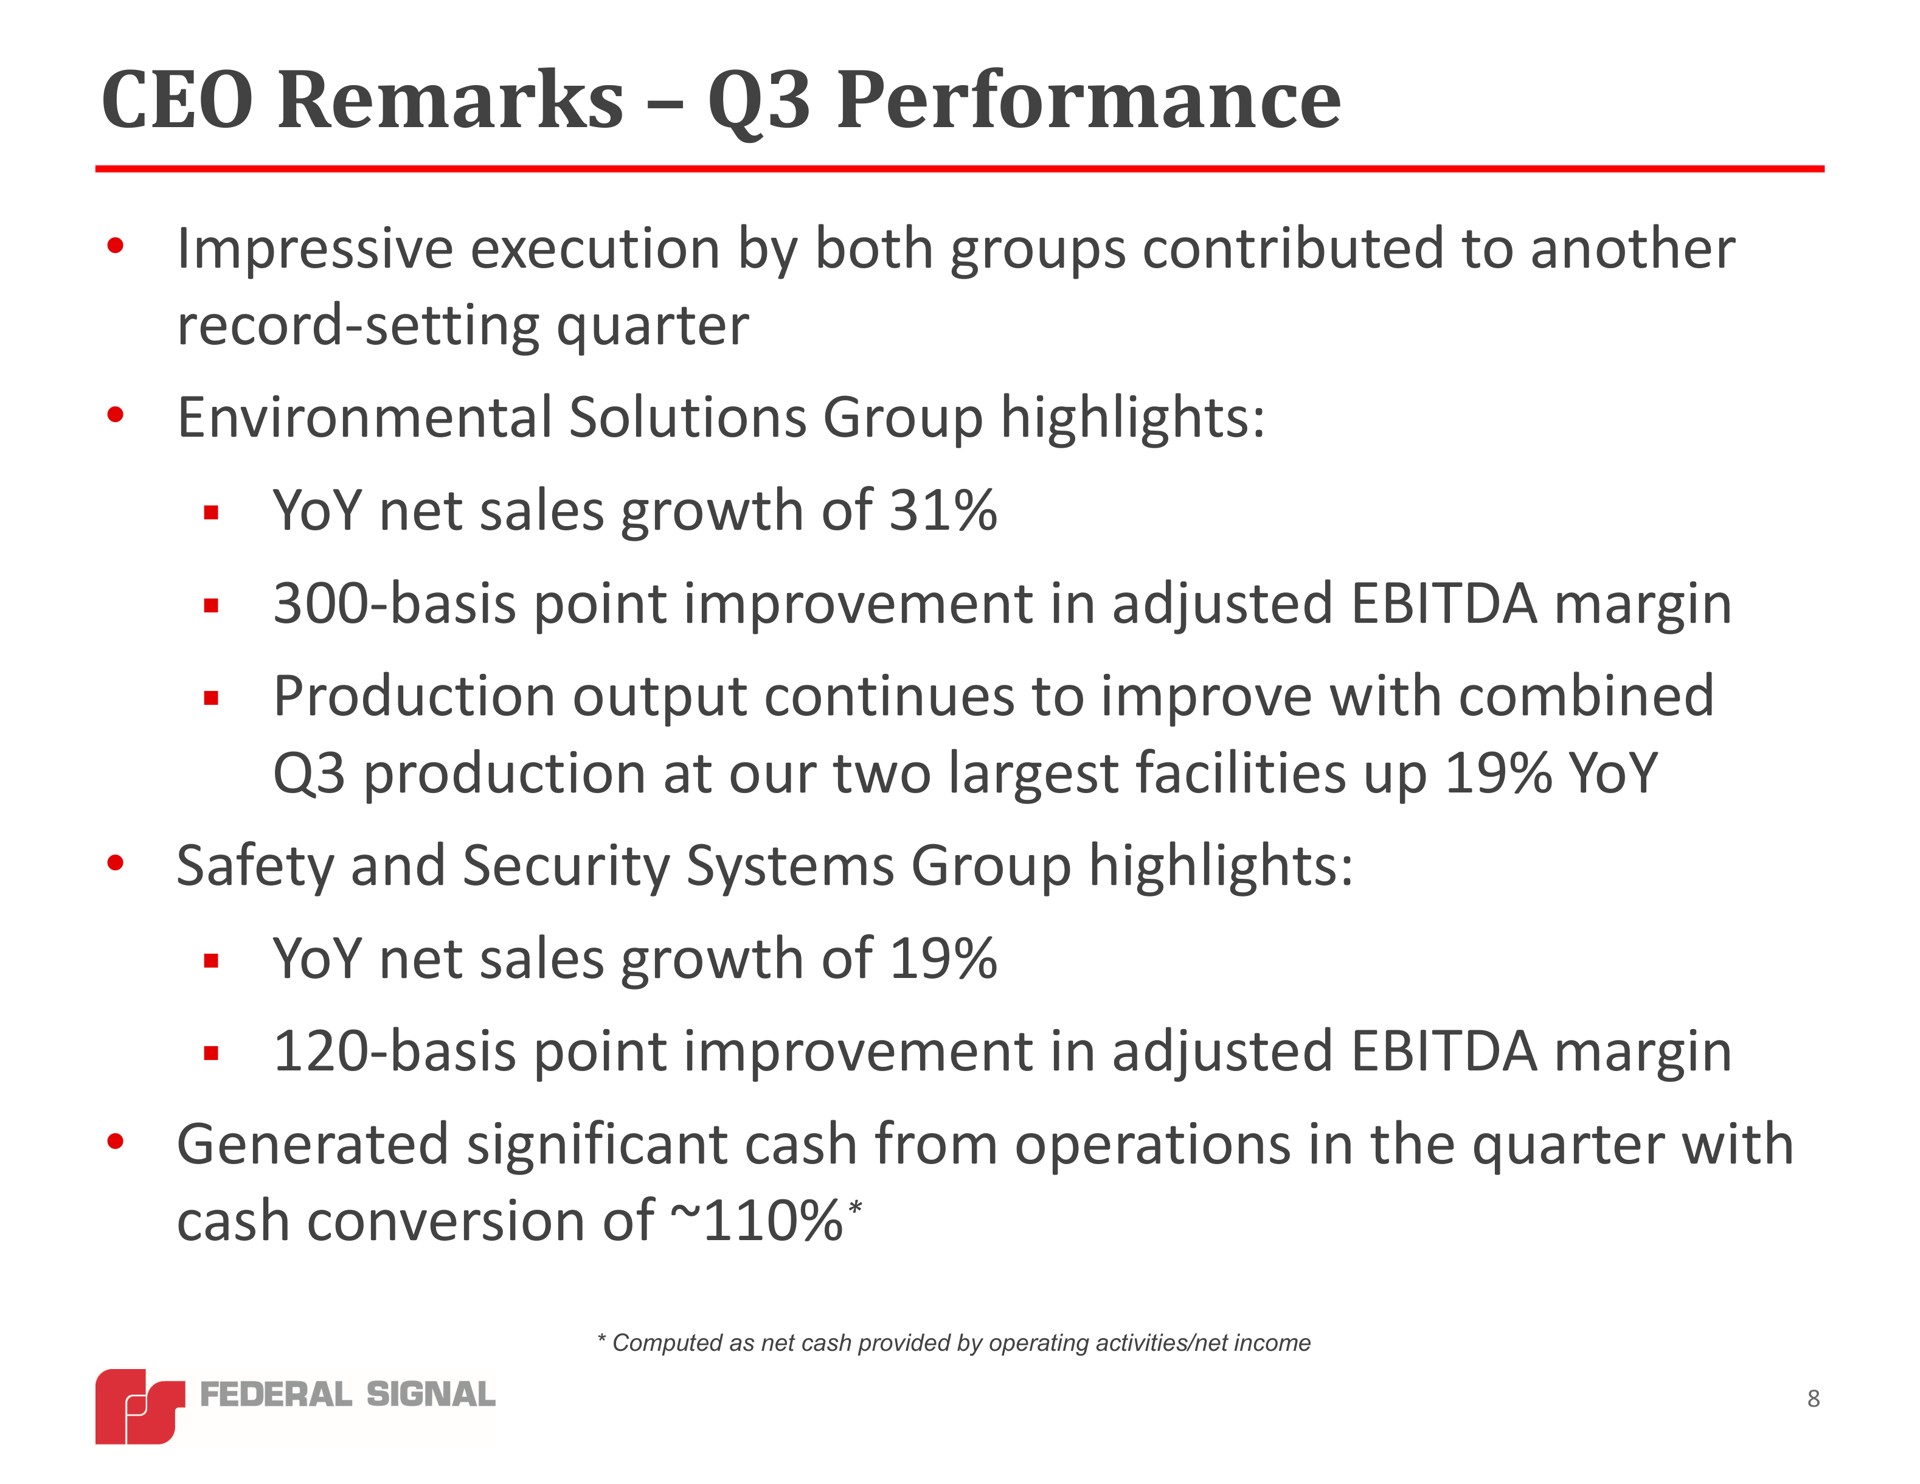 remarks performance impressive execution by both groups contributed to another record setting quarter environmental solutions group highlights yoy net sales growth of basis point improvement in adjusted margin production output continues to improve with combined production at our two facilities up yoy safety and security systems group highlights yoy net sales growth of basis point improvement in adjusted margin generated significant cash from operations in the quarter with cash conversion of | Federal Signal